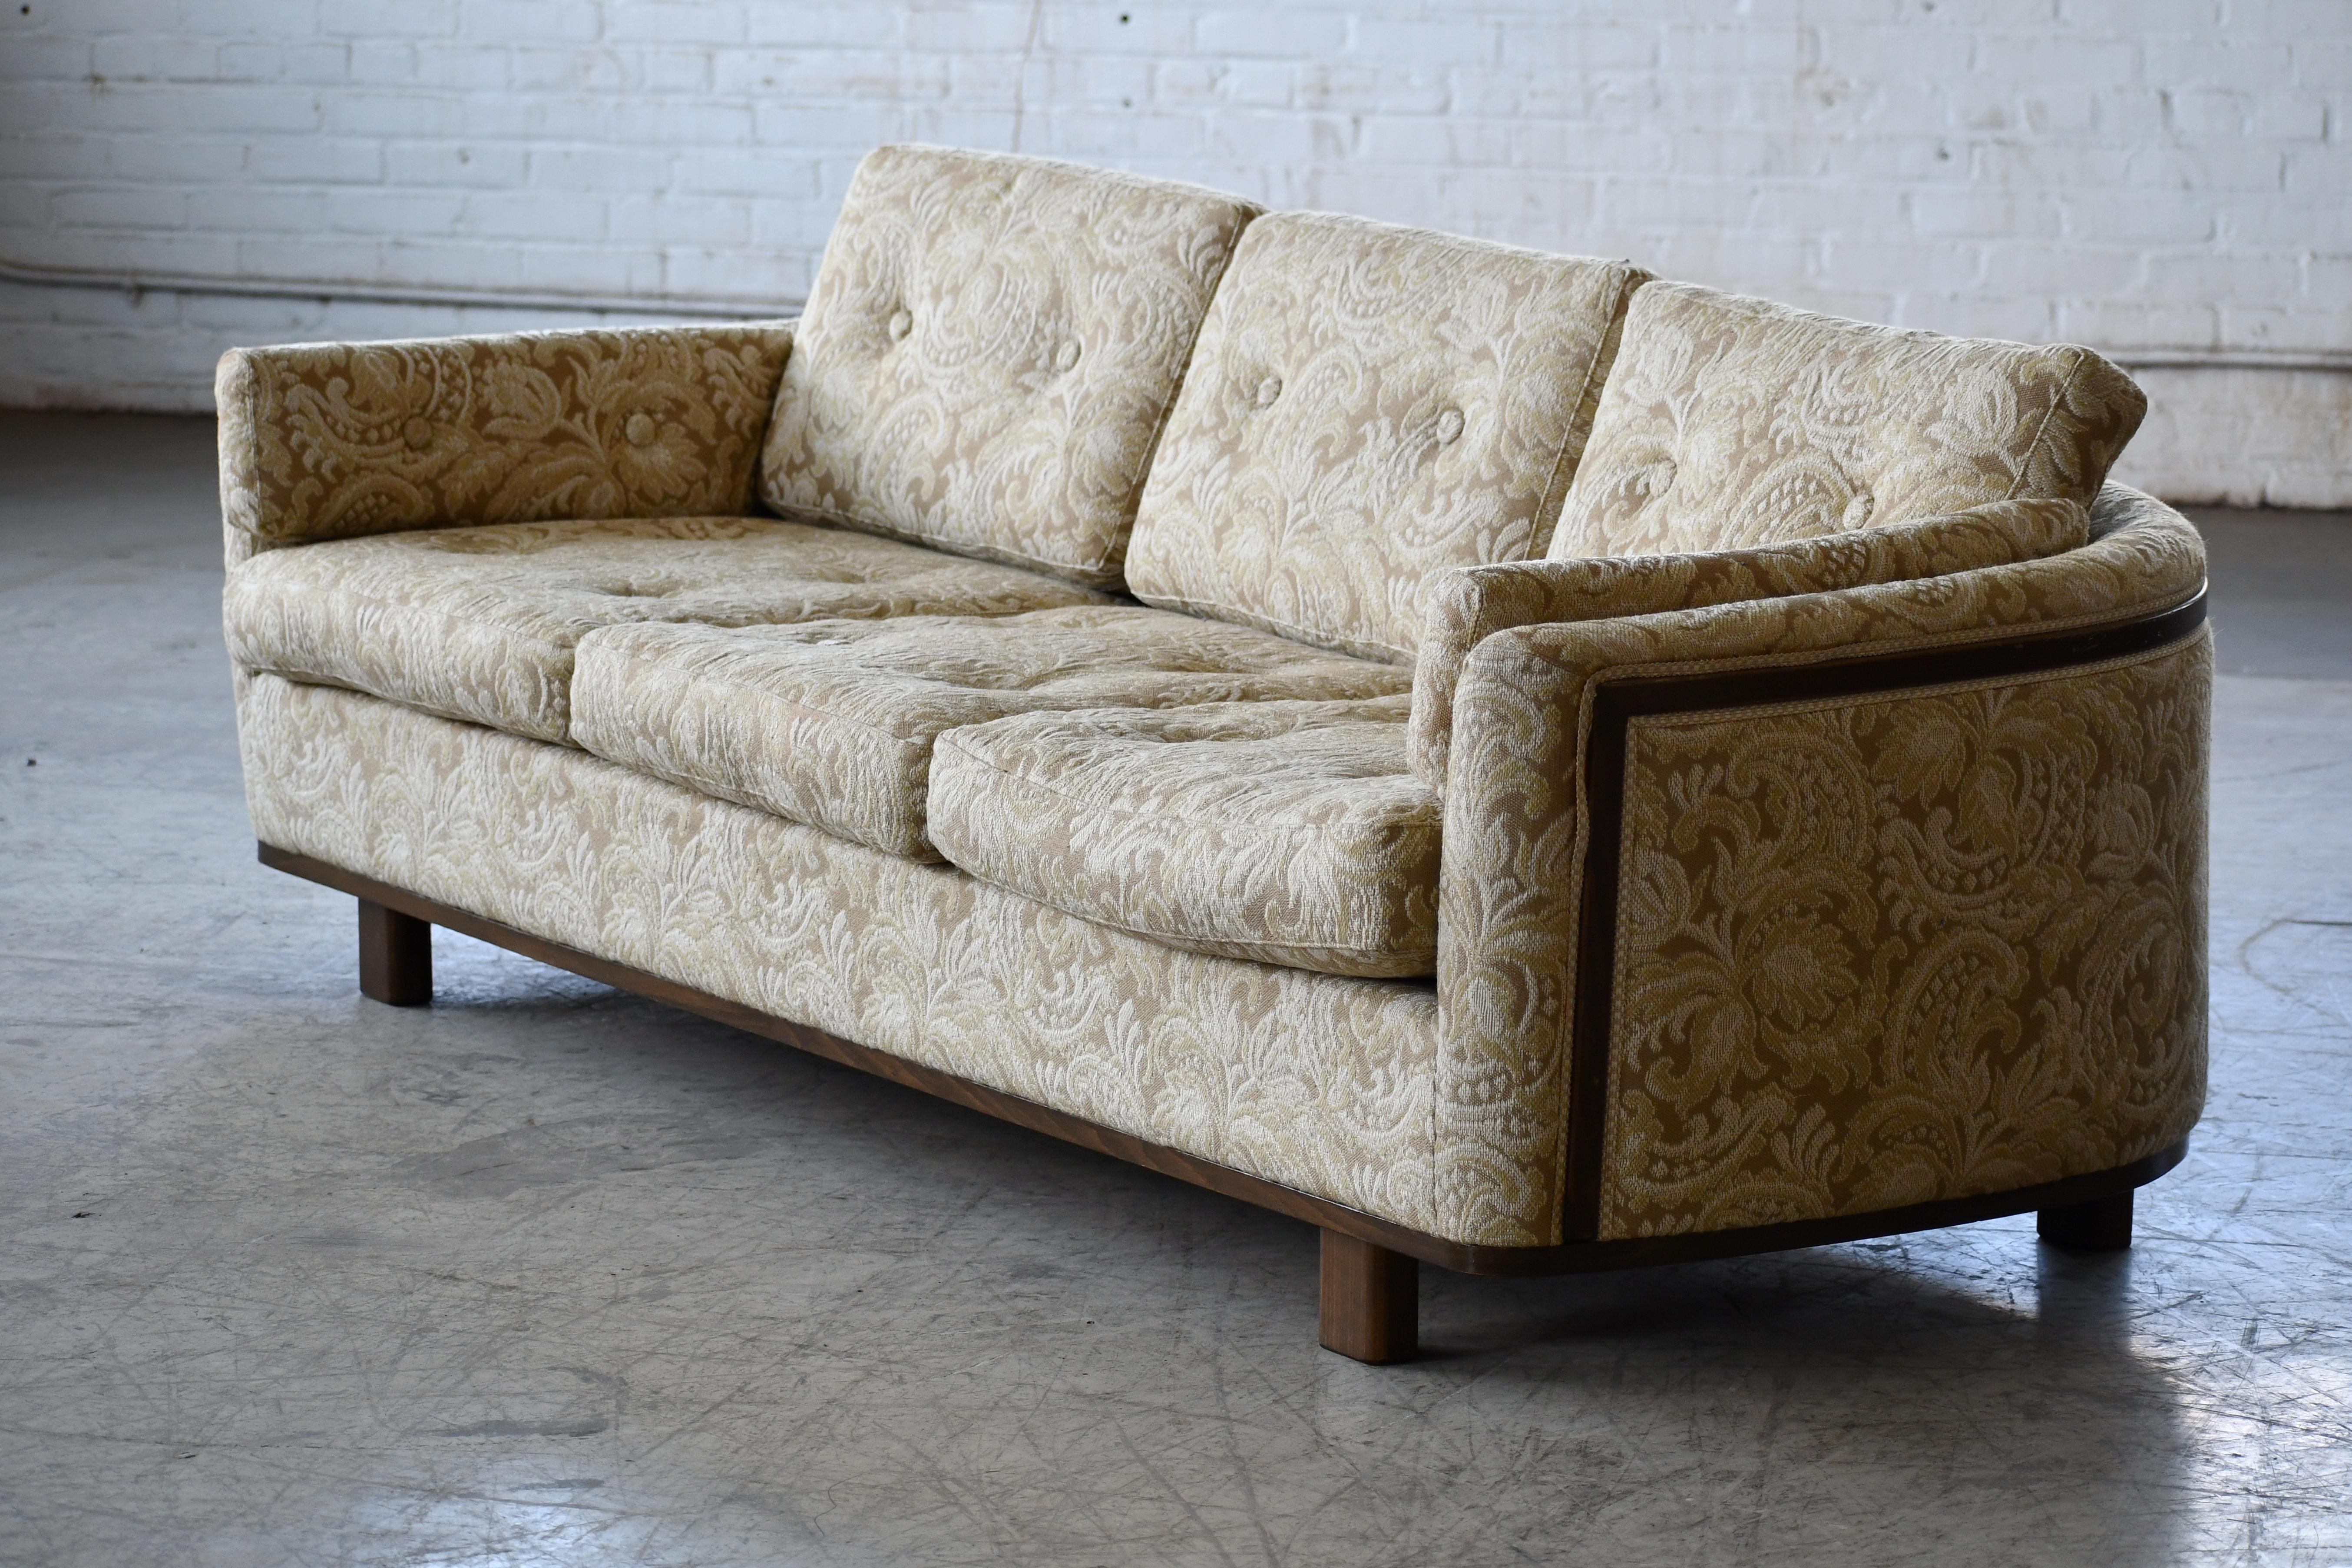 Mid-20th Century Swedish 1960's Sofa with Wooden Accents and Low Organic Proportions For Sale